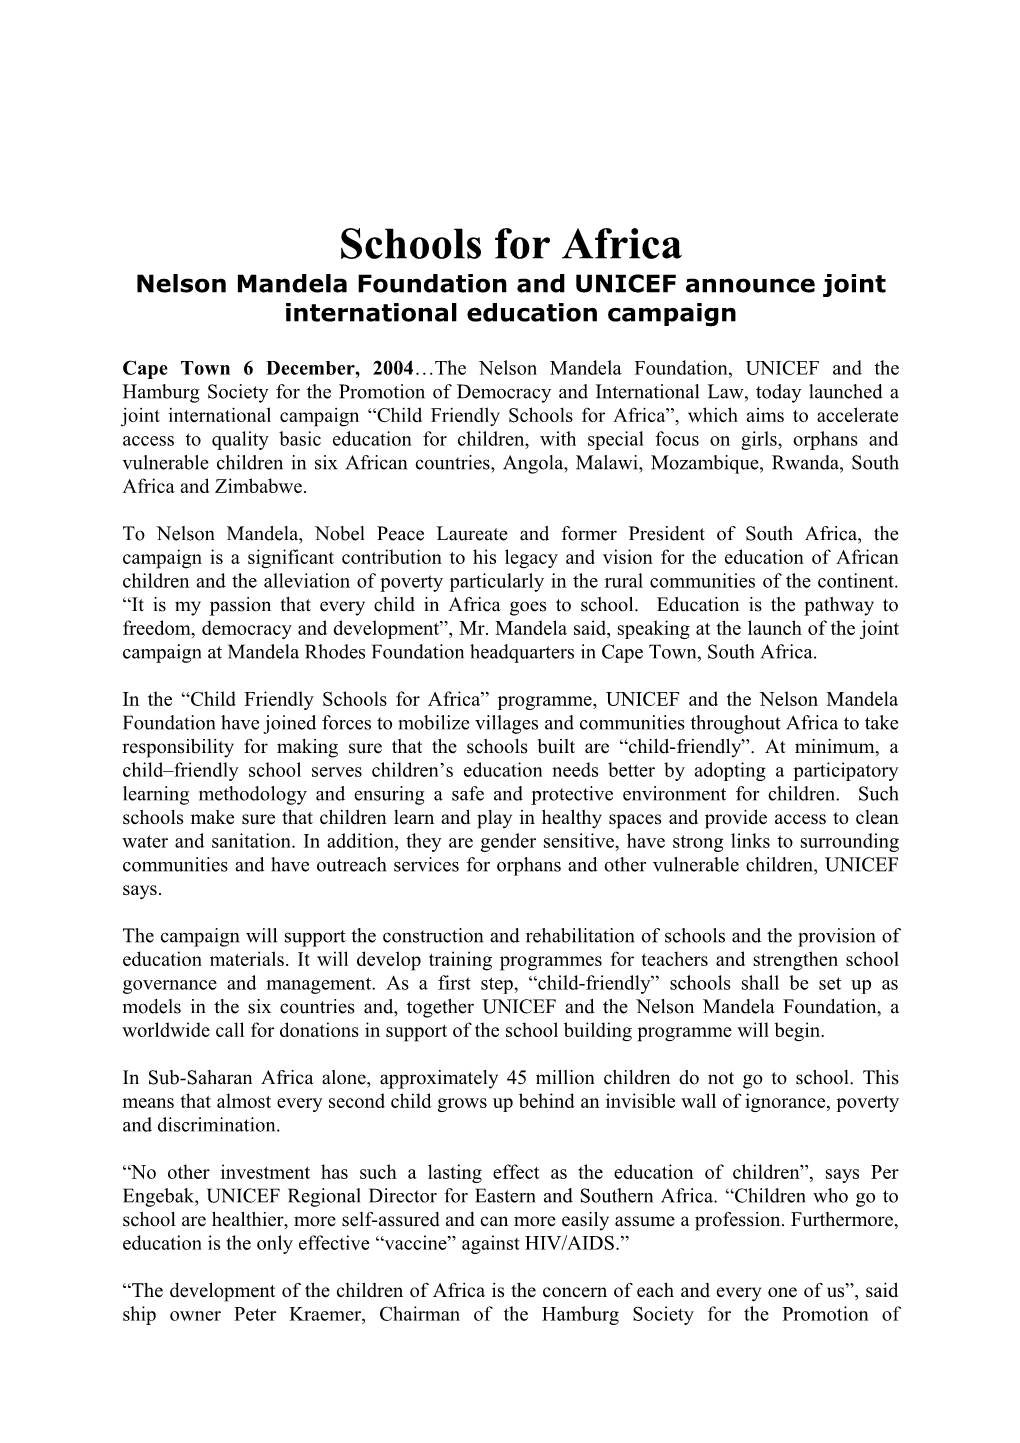 Nelson Mandela Foundation and UNICEF Announce Joint International Education Campaign